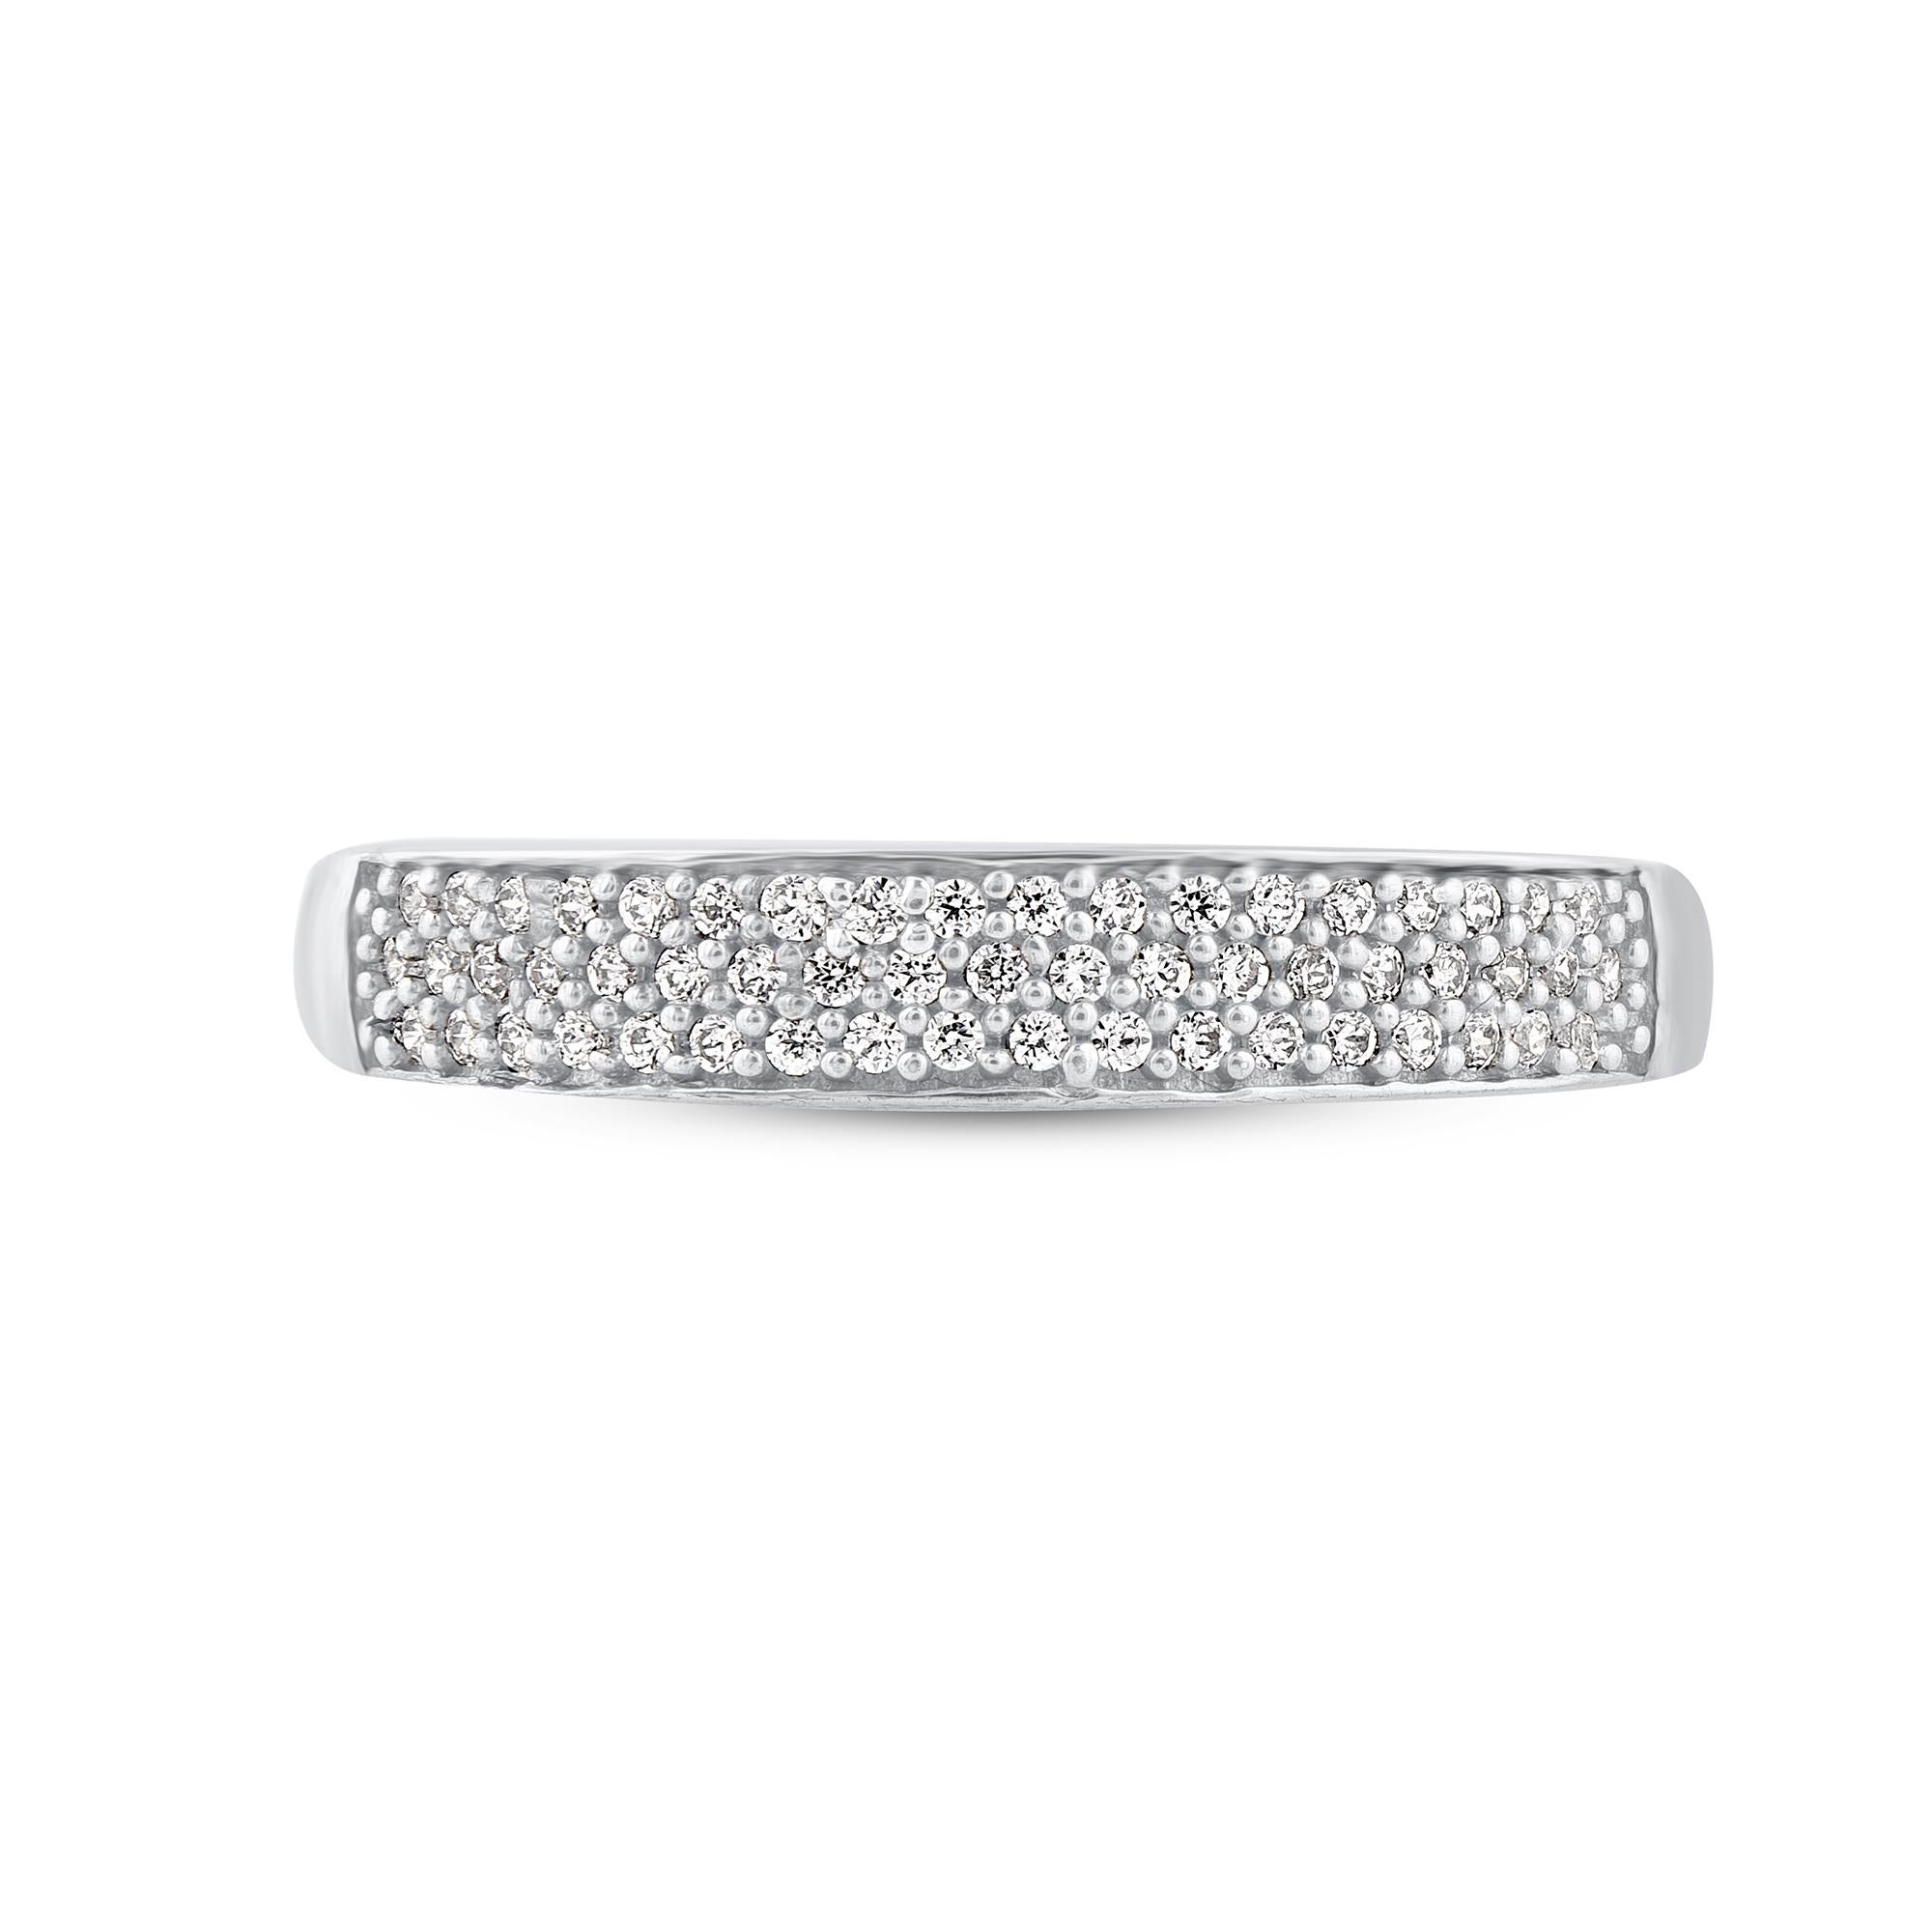 Bring charm to your look with this diamond wedding band Ring. This ring is beautifully crafted in 14 Karat white gold and embedded with 55 natural round single cut diamonds in pave setting. Total diamond weight is 0.25 carat. The diamonds are graded